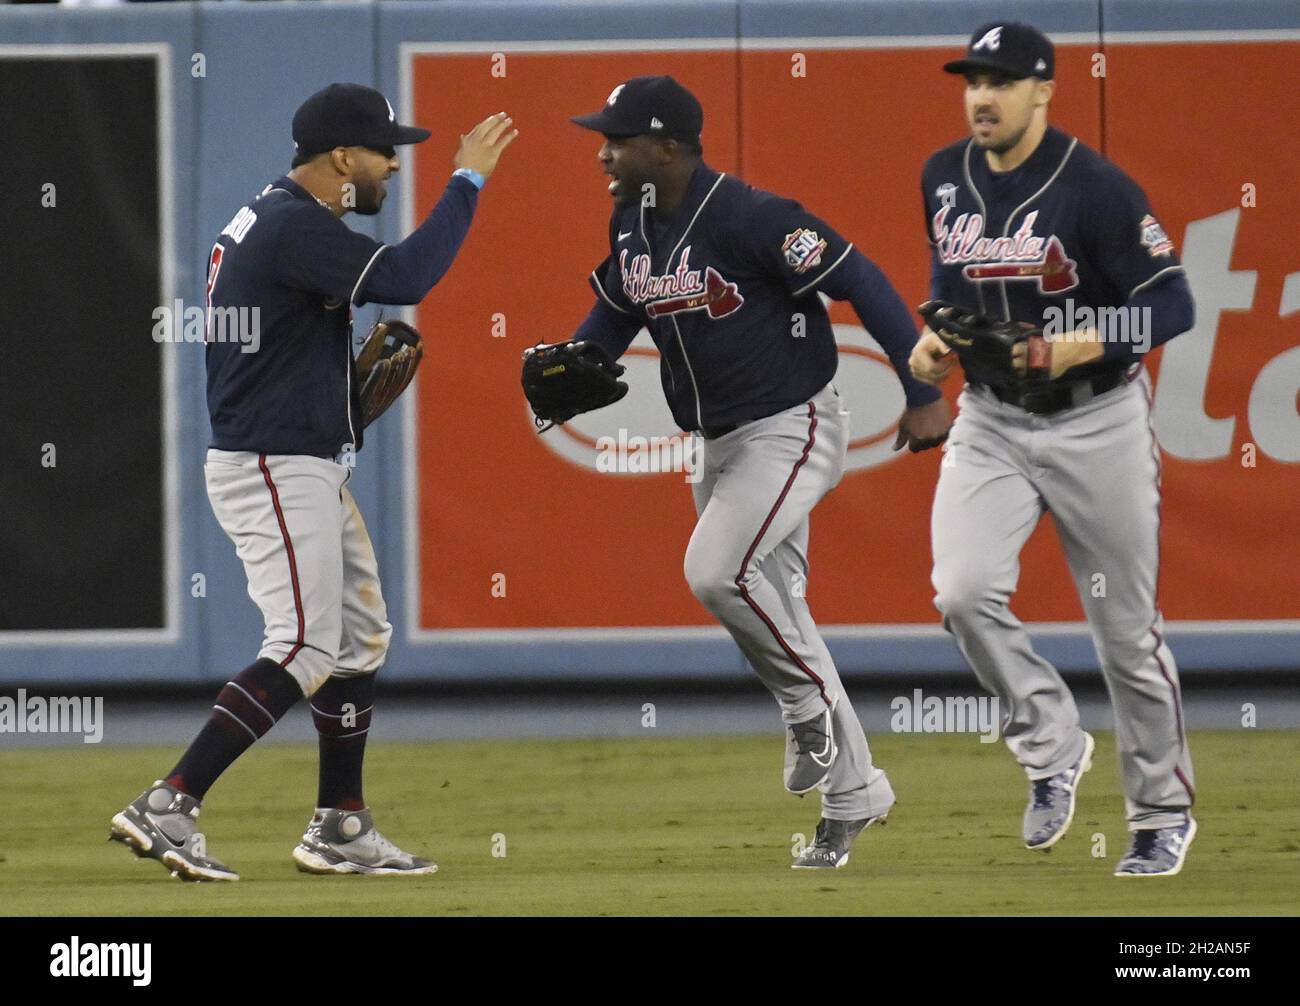 Los Angeles, United States. 20th Oct, 2021. Outfielders (L-R) Eddie Rosario, Guilermo Heredia, and Adam Duvall celebrate defeating the Los Angels Dodgers in game four of the MLB NLCS at Dodger Stadium on Wednesday, October 20, 2021 in Los Angeles, California. Winning game four 9-2, Atlanta leads Los Angeles 3-1 in the championship series. Photo by Jim Ruymen/UPI Credit: UPI/Alamy Live News Stock Photo